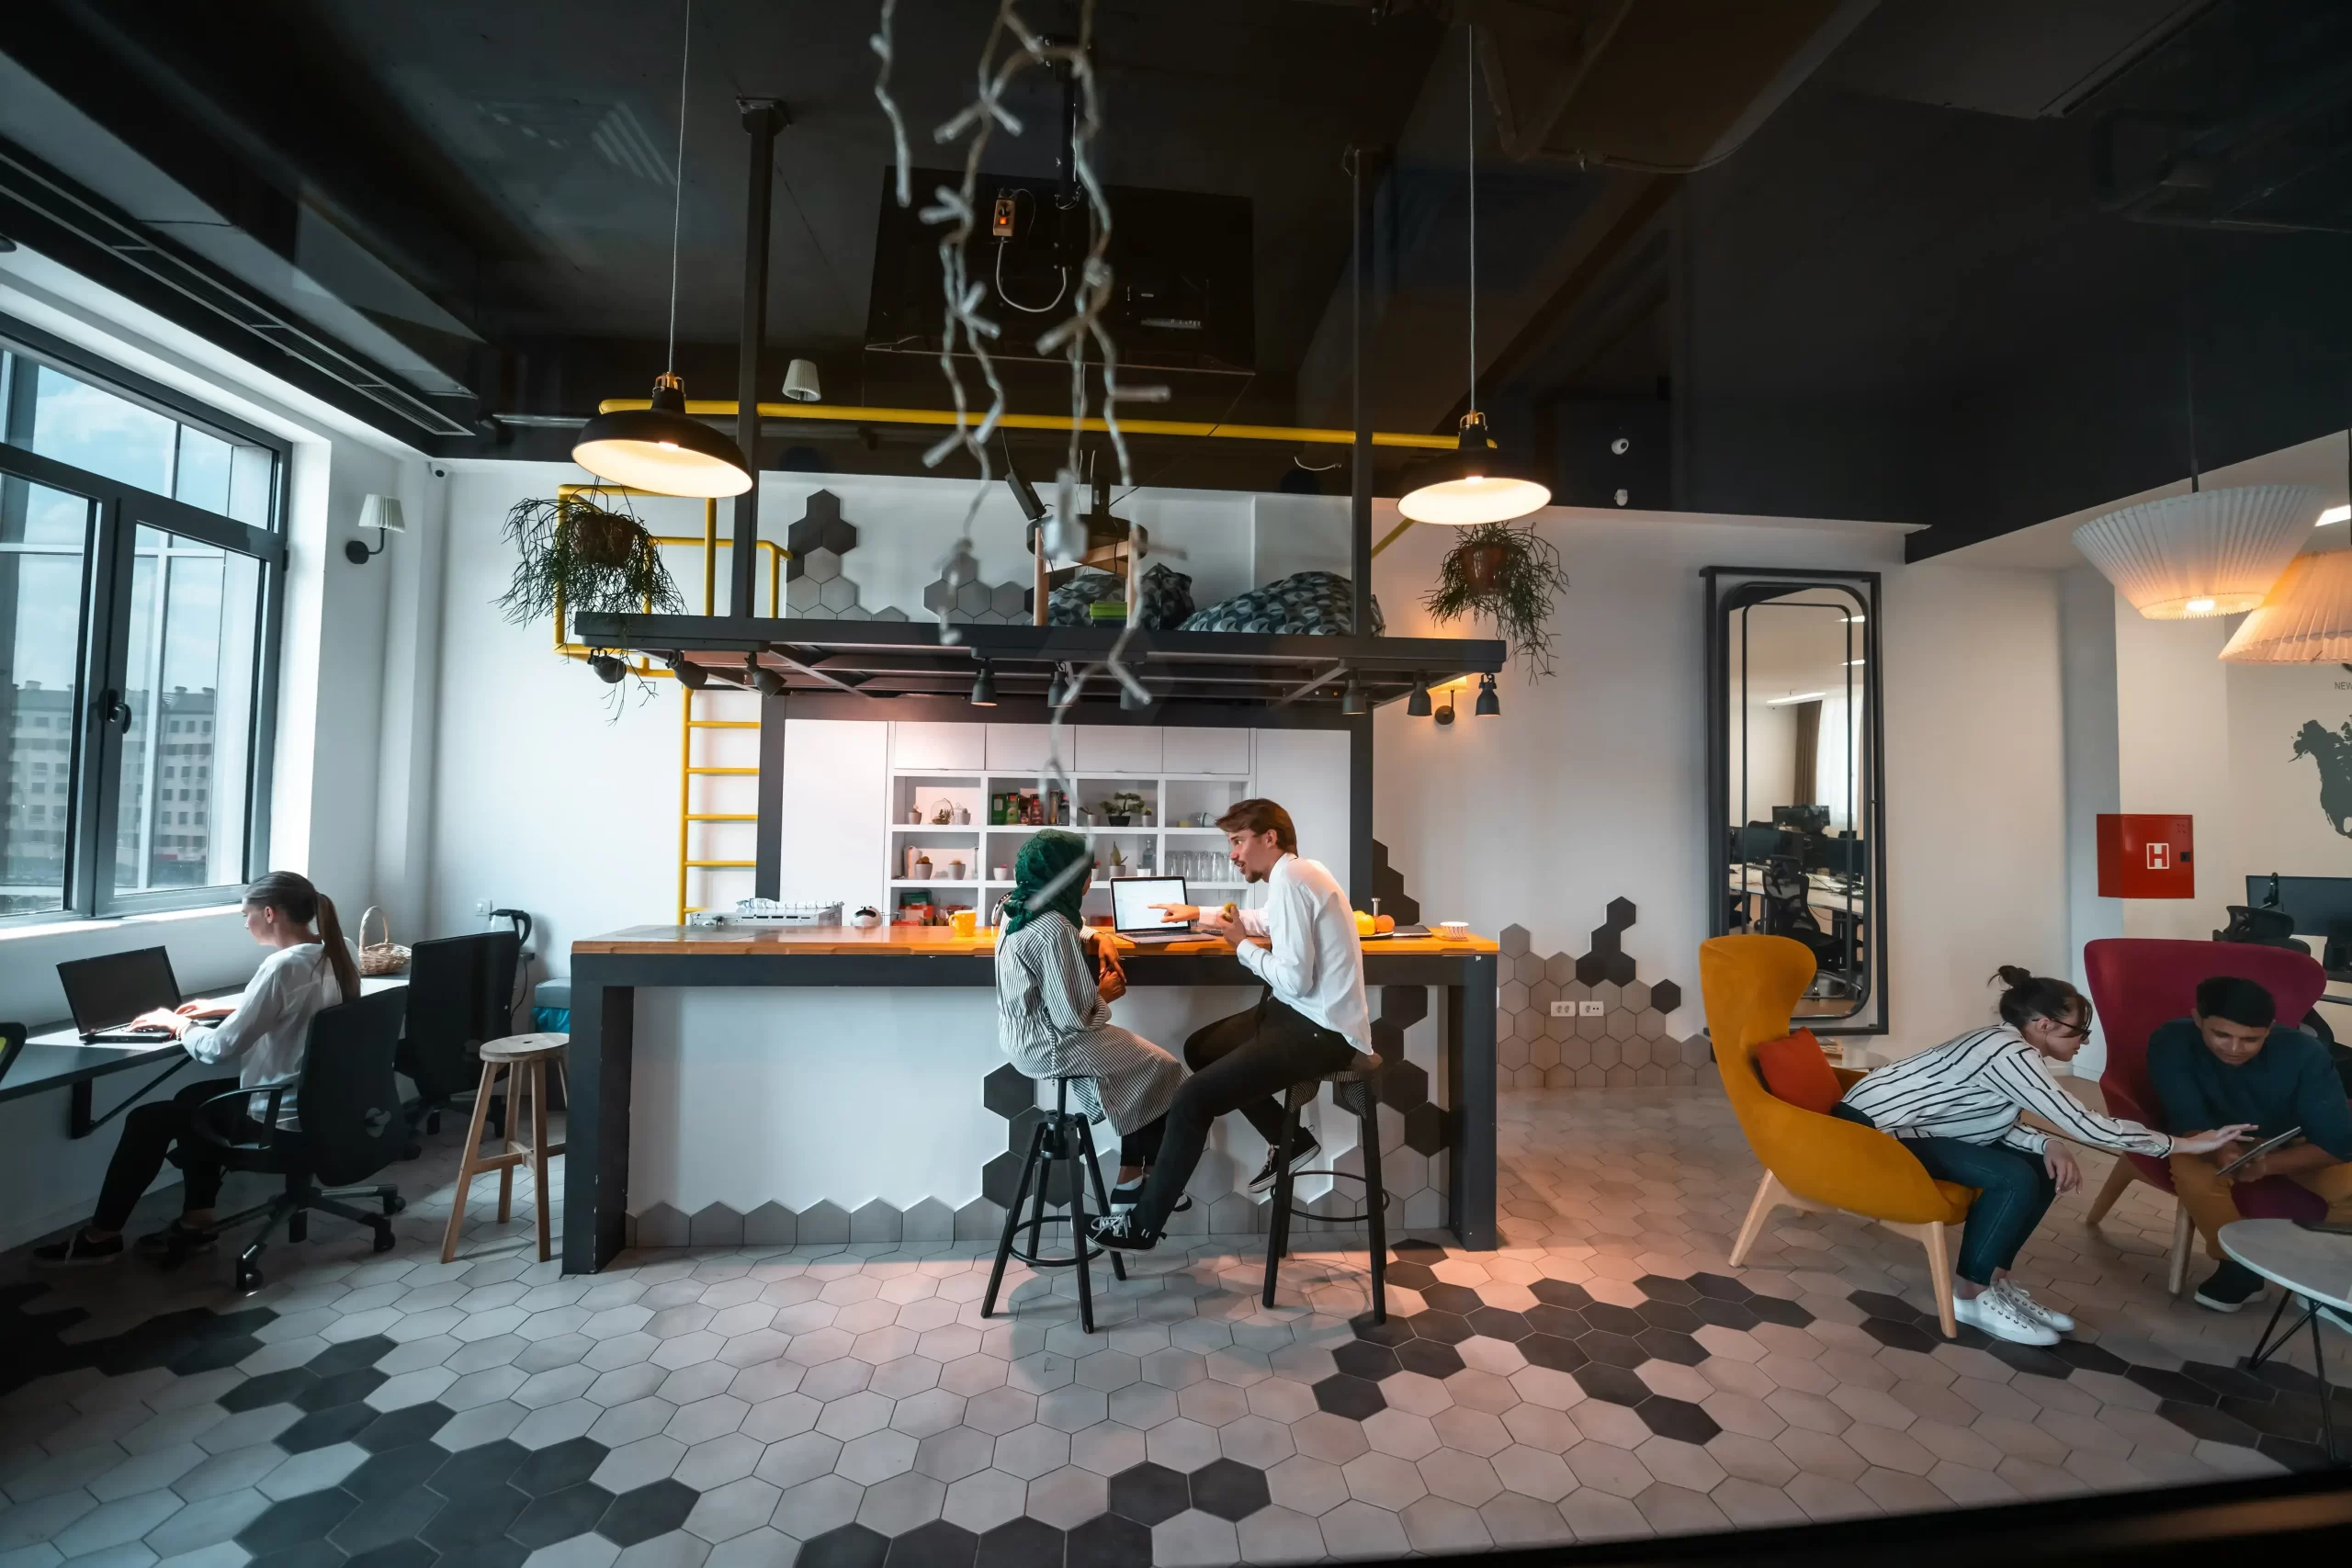 group-casual-multiethnic-businesspeople-taking-break-from-work-doing-different-things-while-enjoying-free-time-relaxation-area-modern-open-plan-startup-office-high-quality-photo[1]